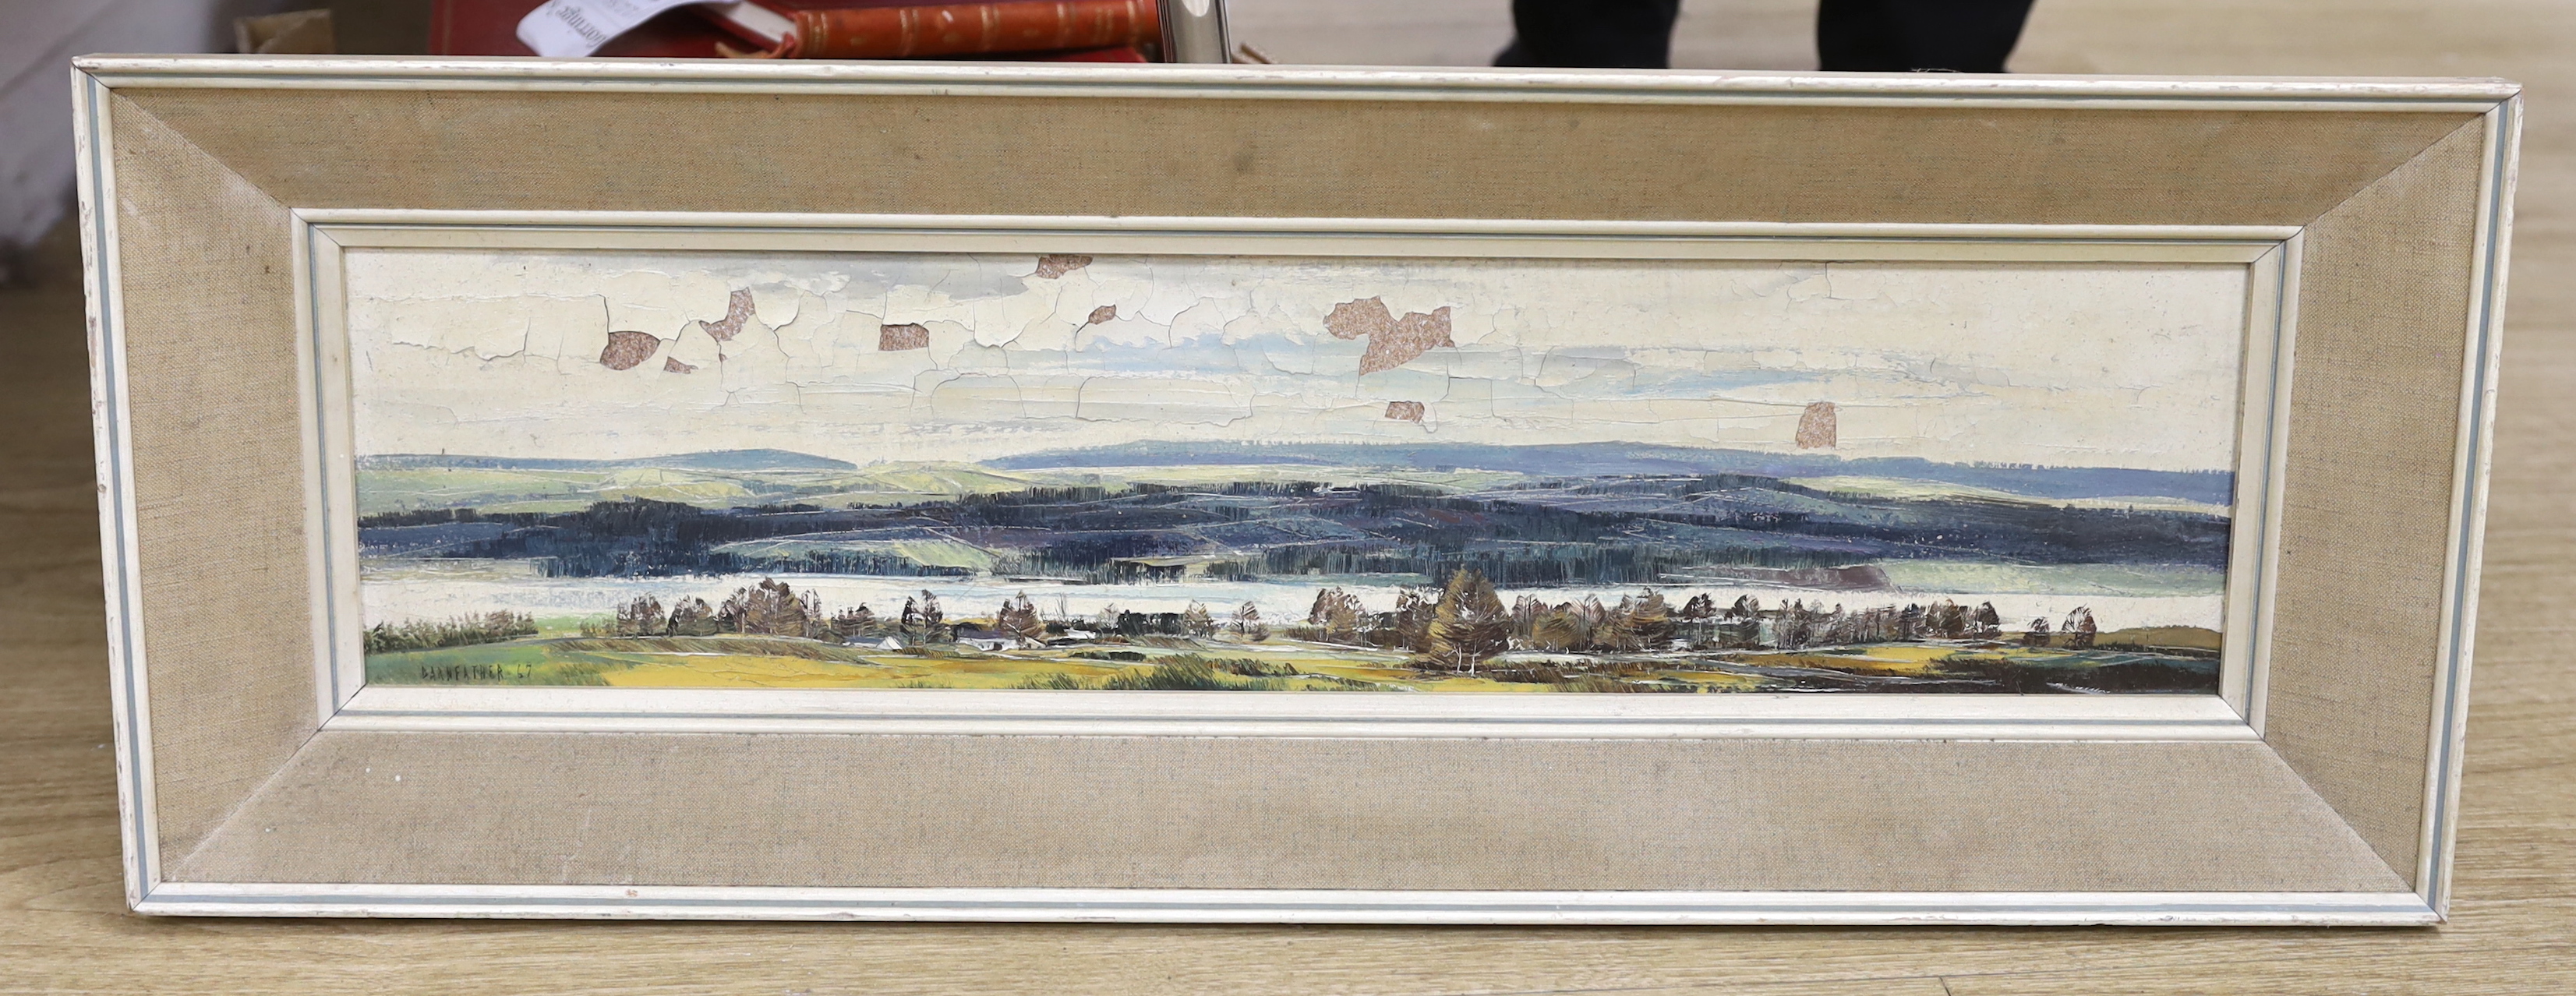 Michael Barnfather (1934-), oil on board, View over the Severn, signed and dated '67, 14 x 60cm, paint flaking